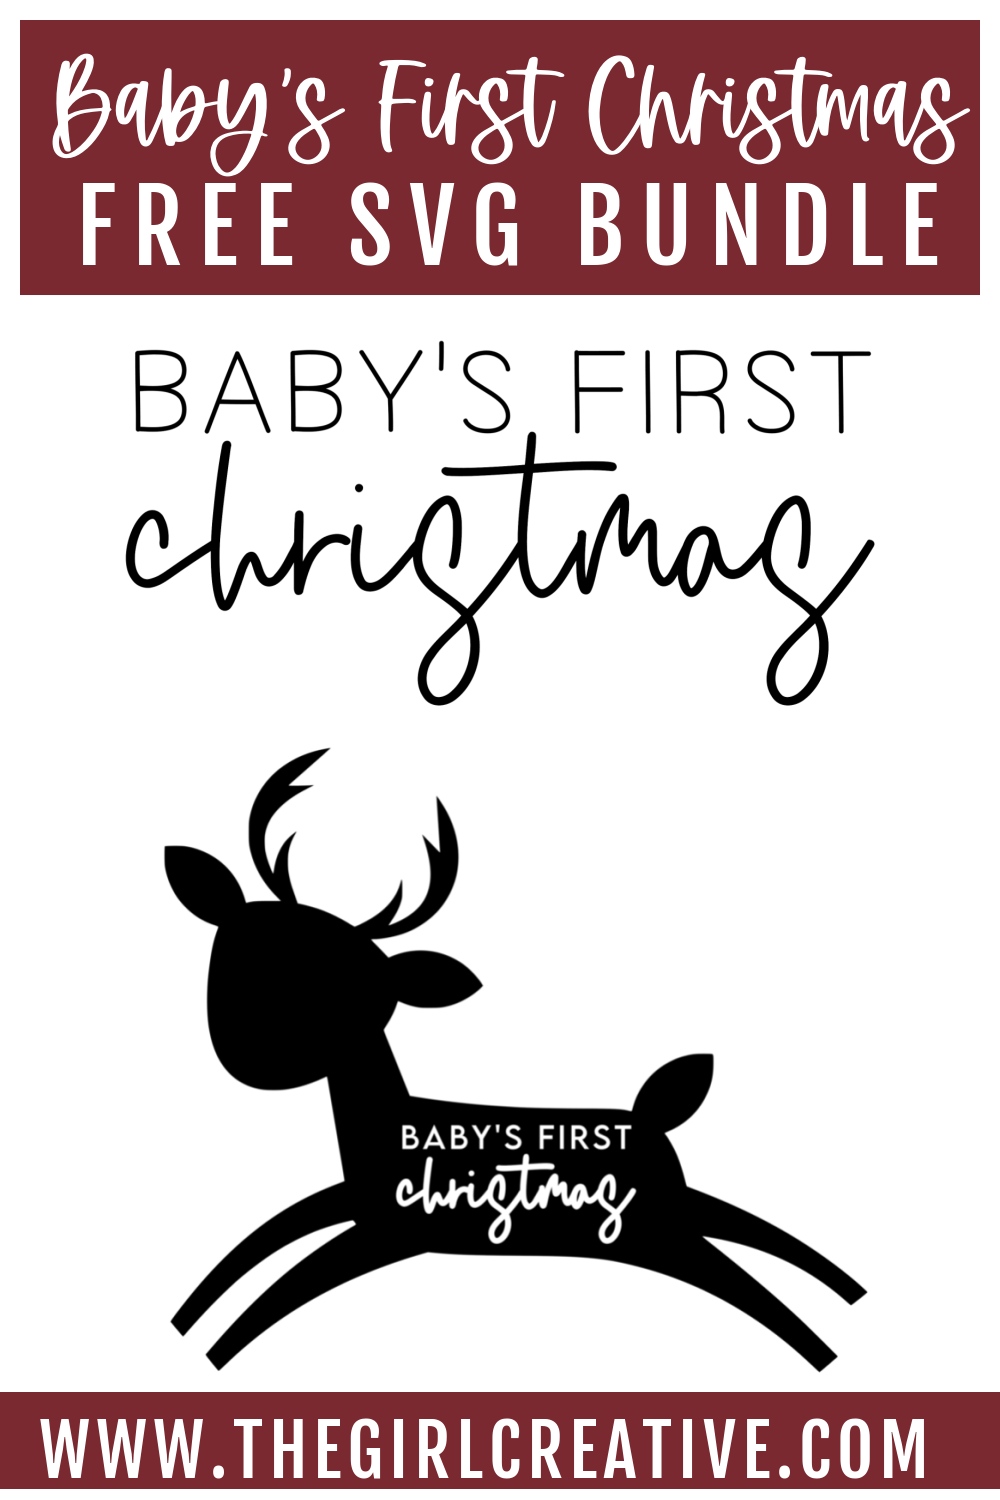 FREE Baby’s First Christmas SVG Bundle - The Girl Creative